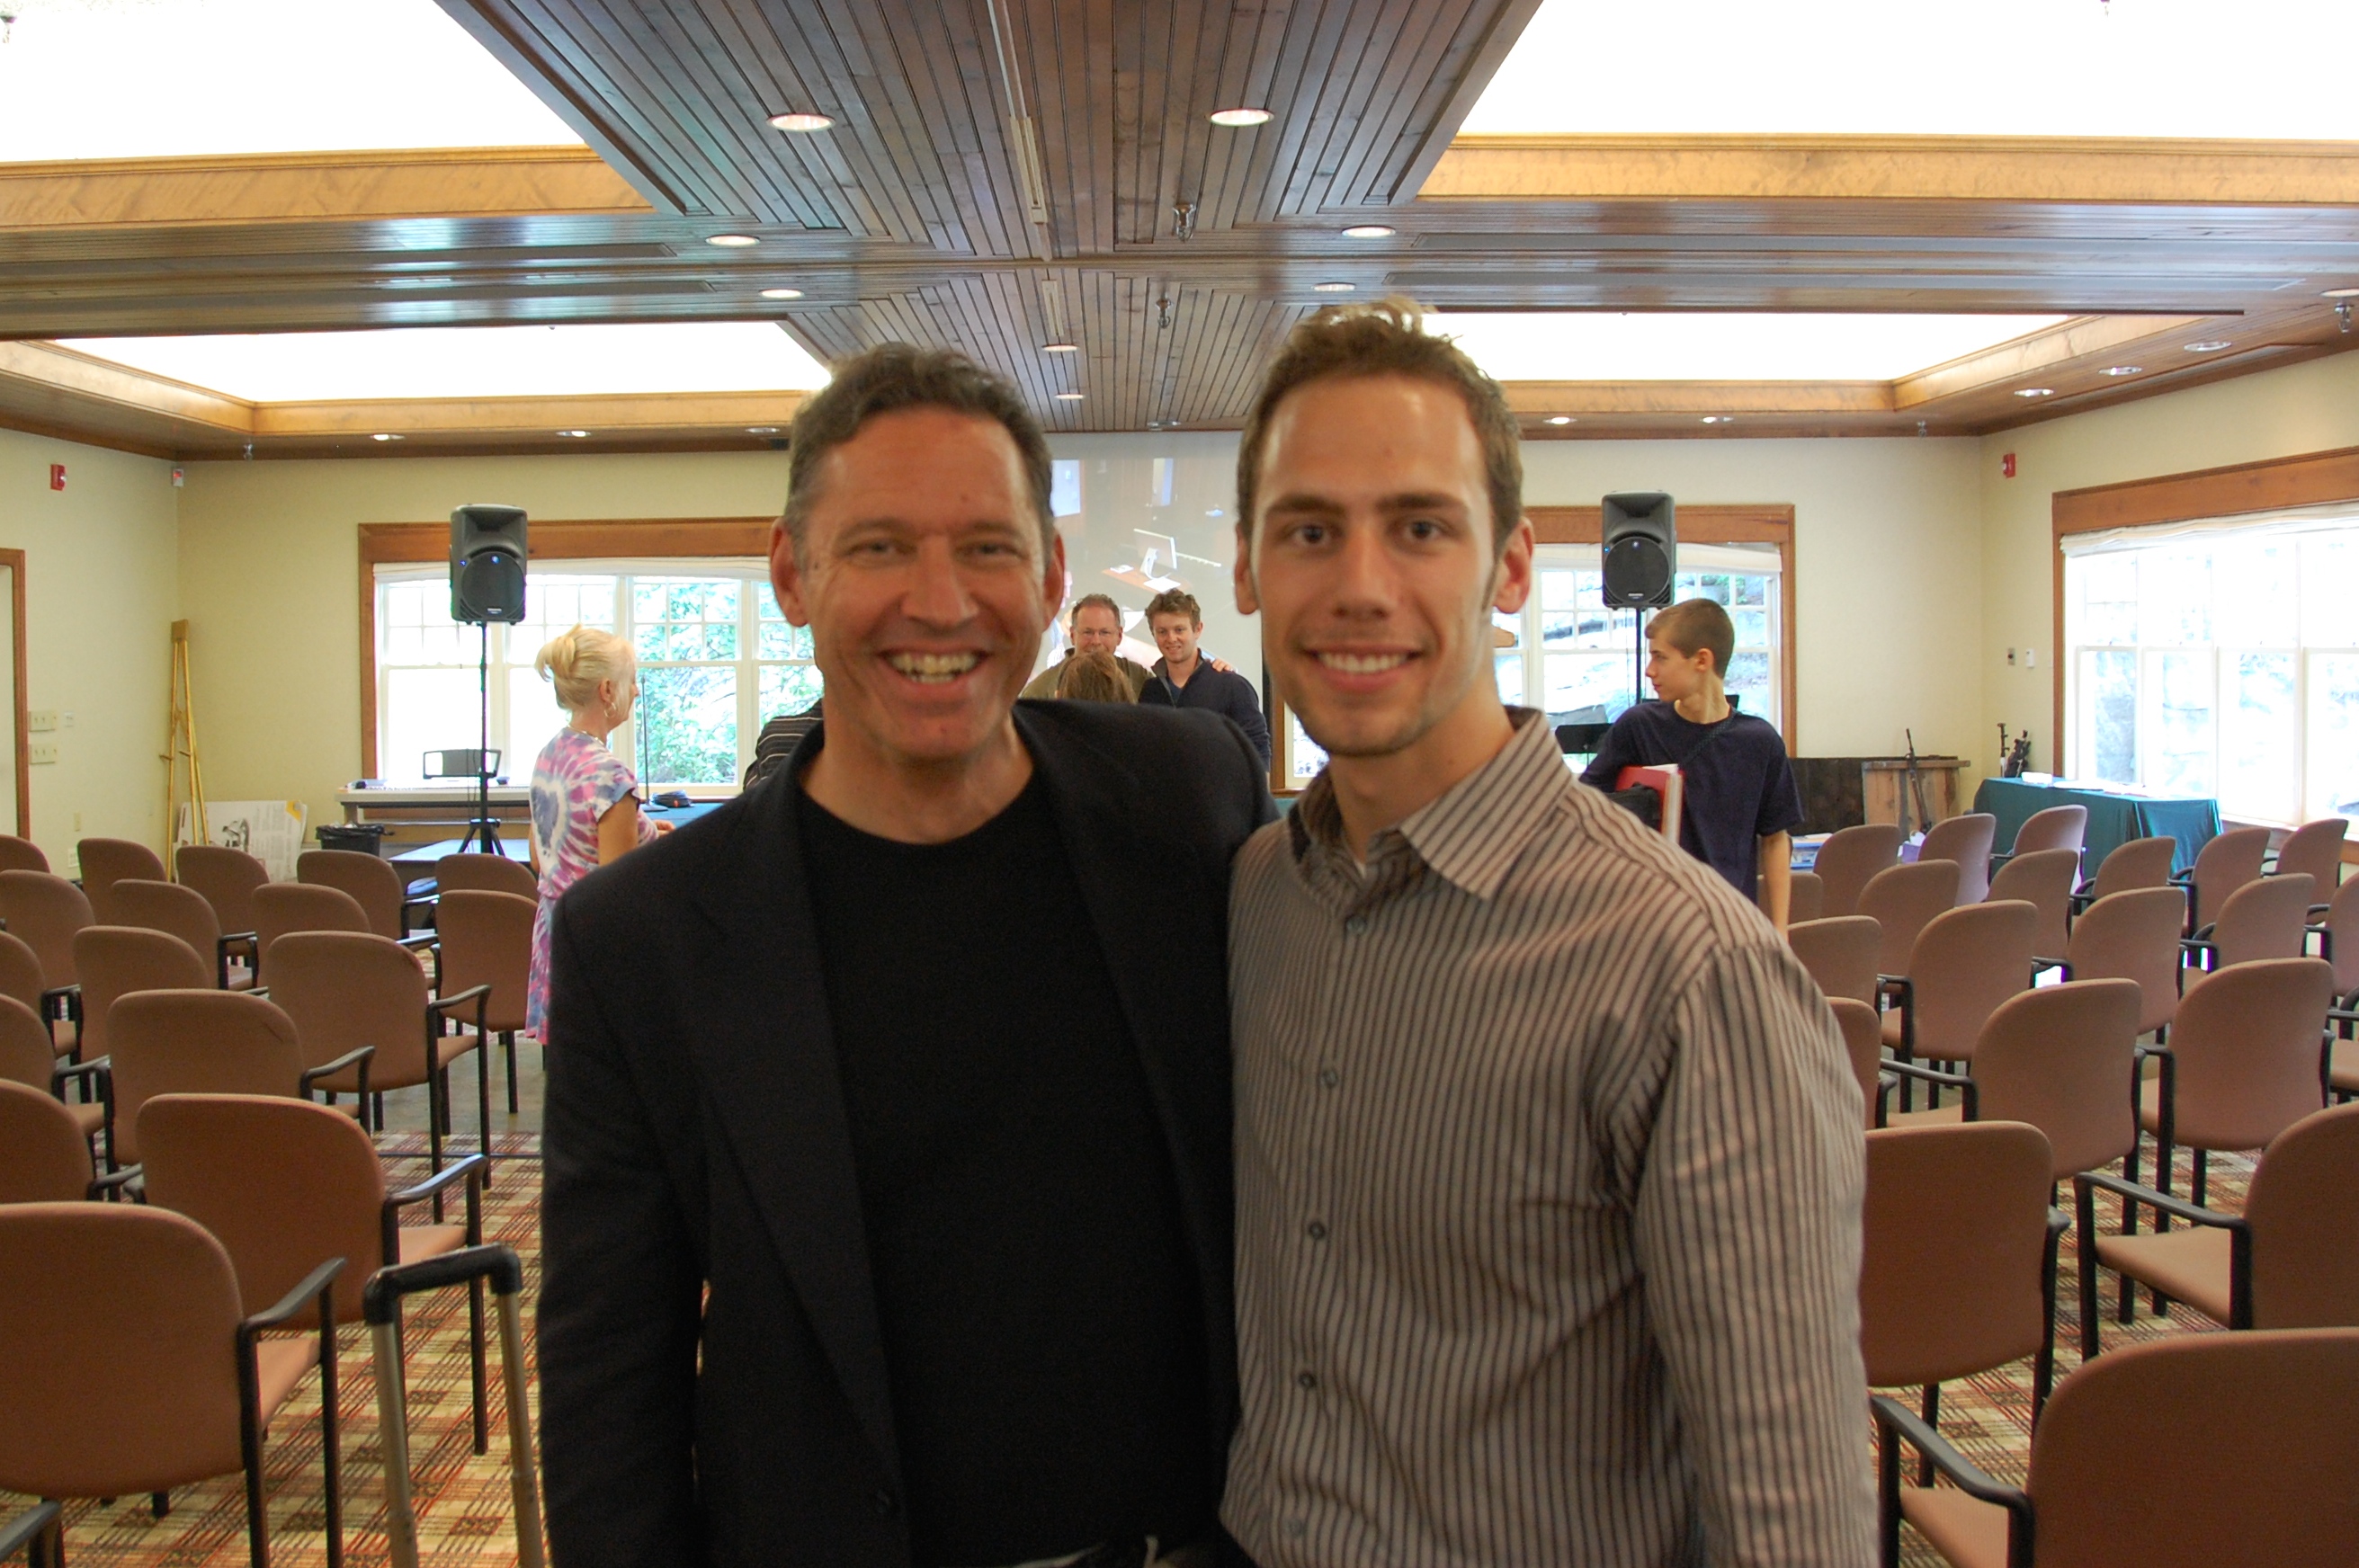 Award-winning writer John Fornof (Adventures In Odyssey) with Nathan Jacobson at the 2013 Lamplighter Guild in Orlando.